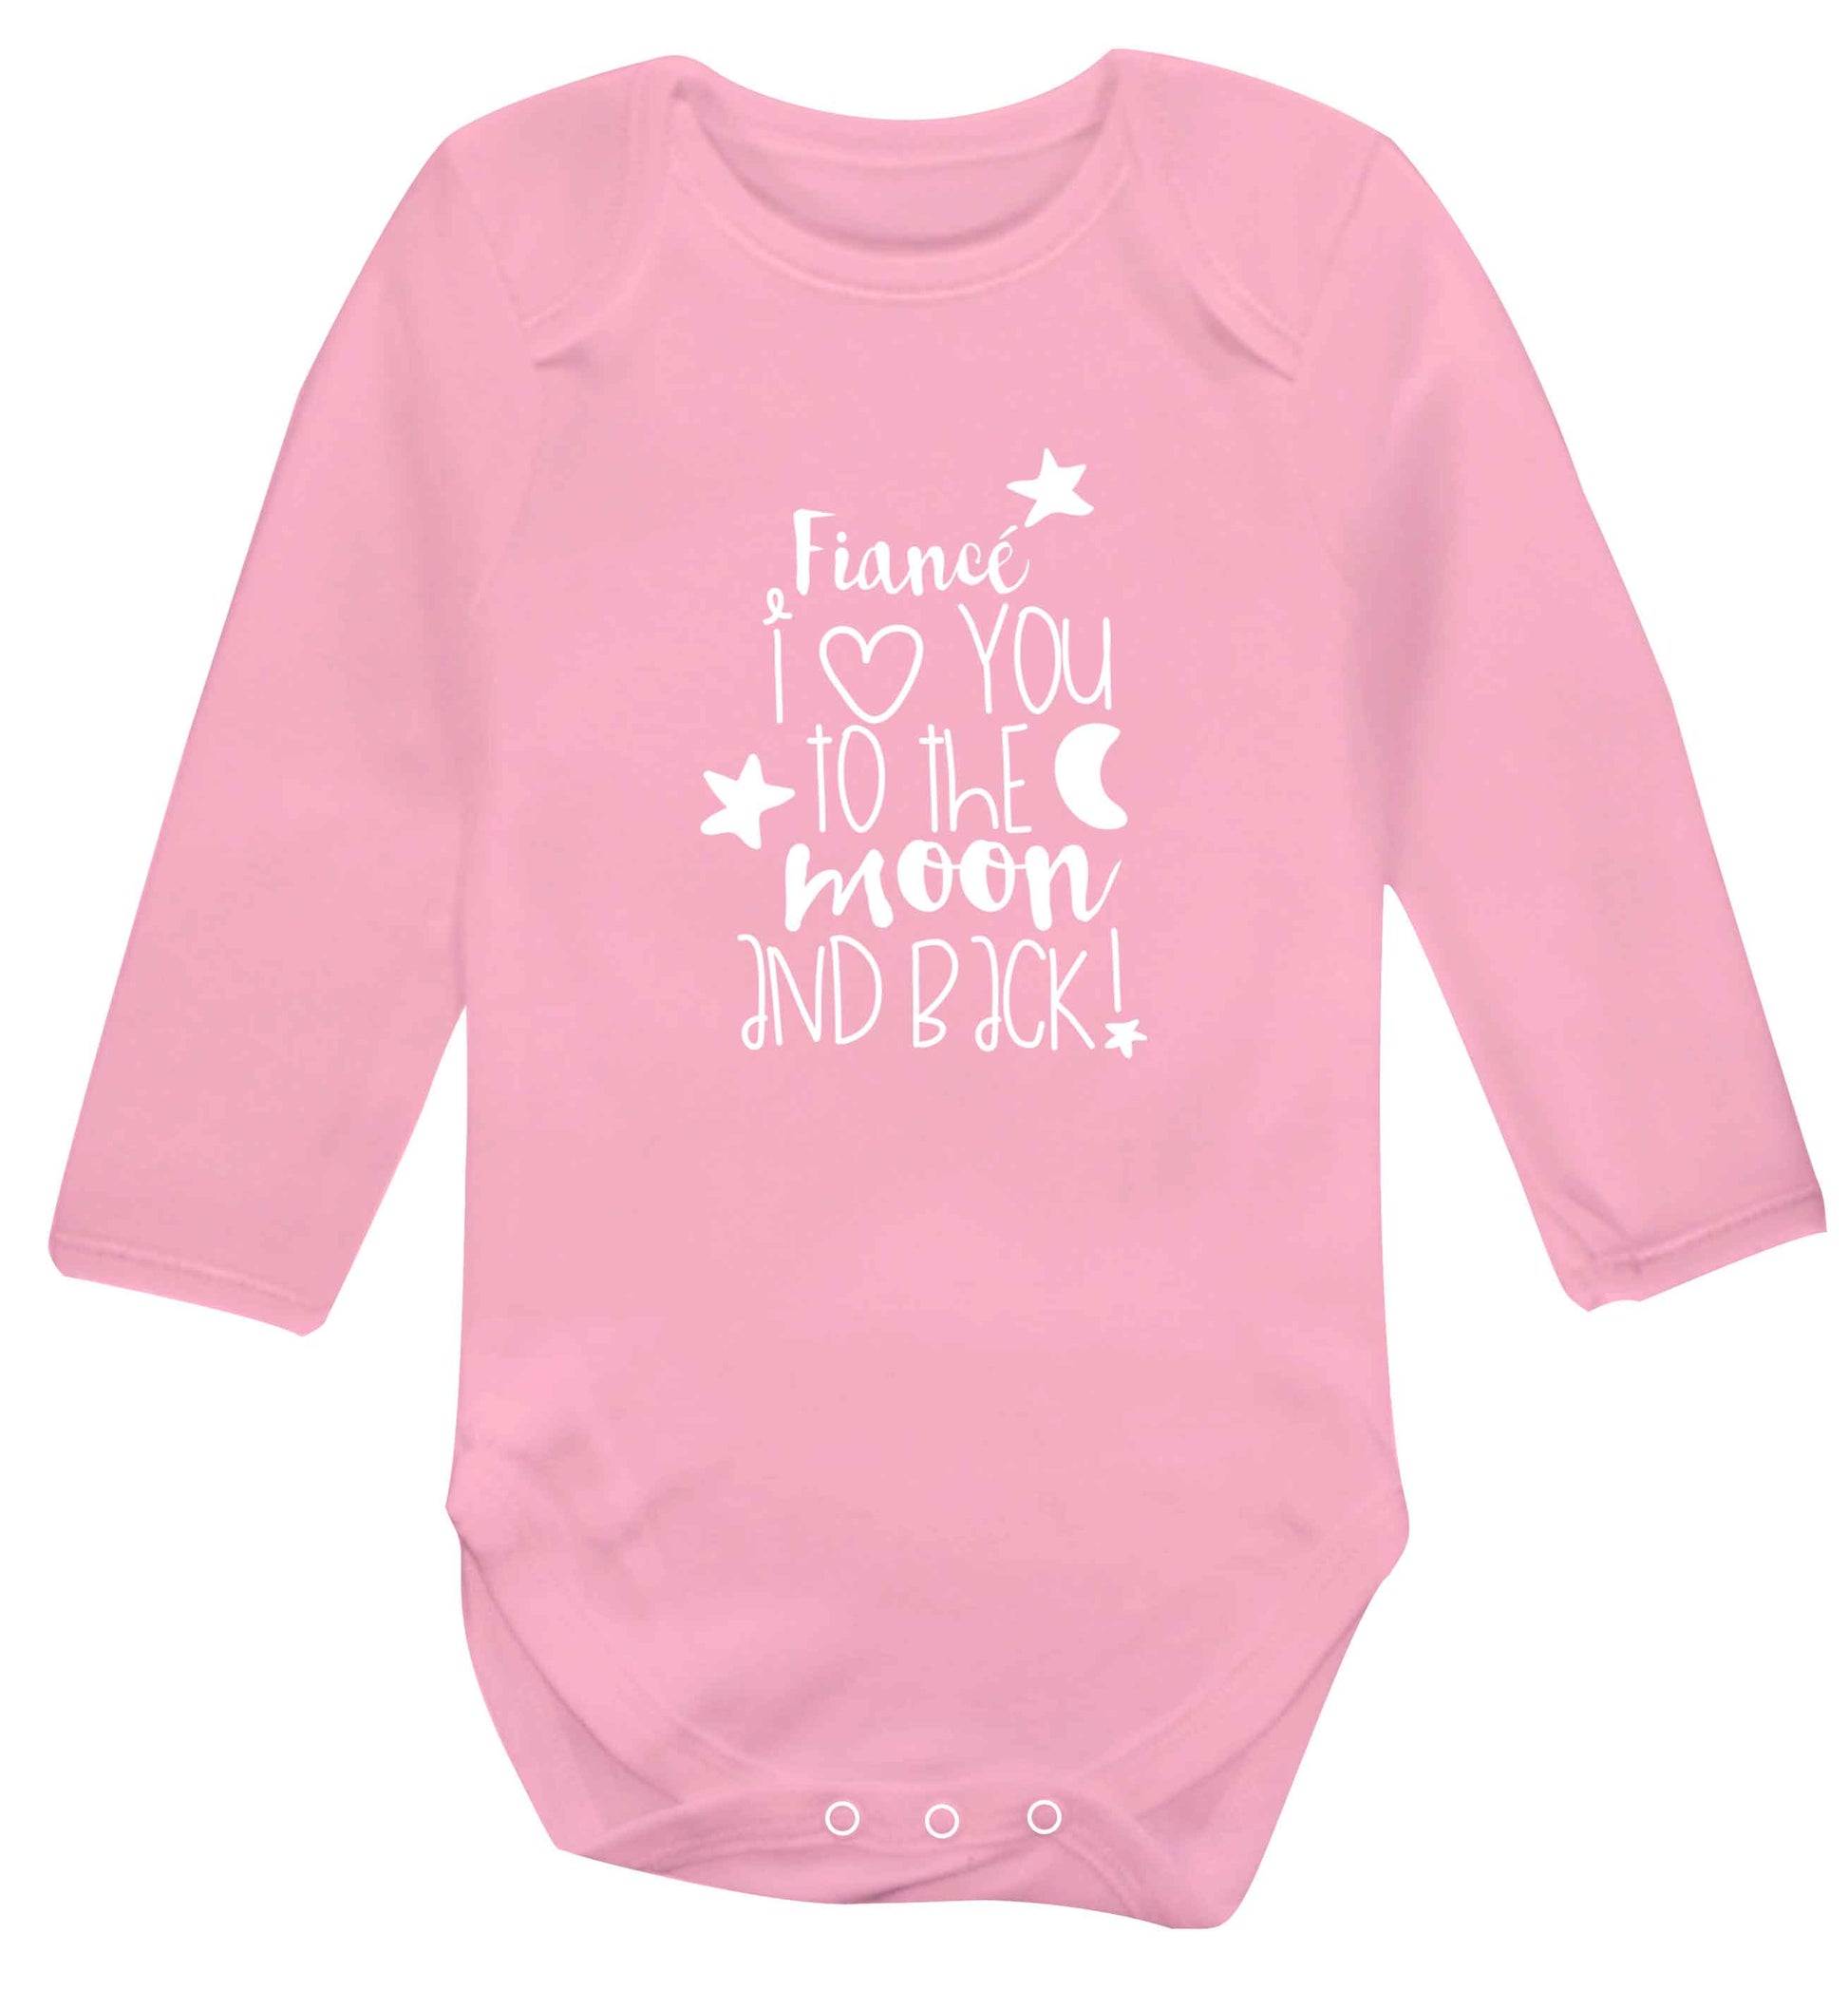 Fianc√© I love you to the moon and back baby vest long sleeved pale pink 6-12 months